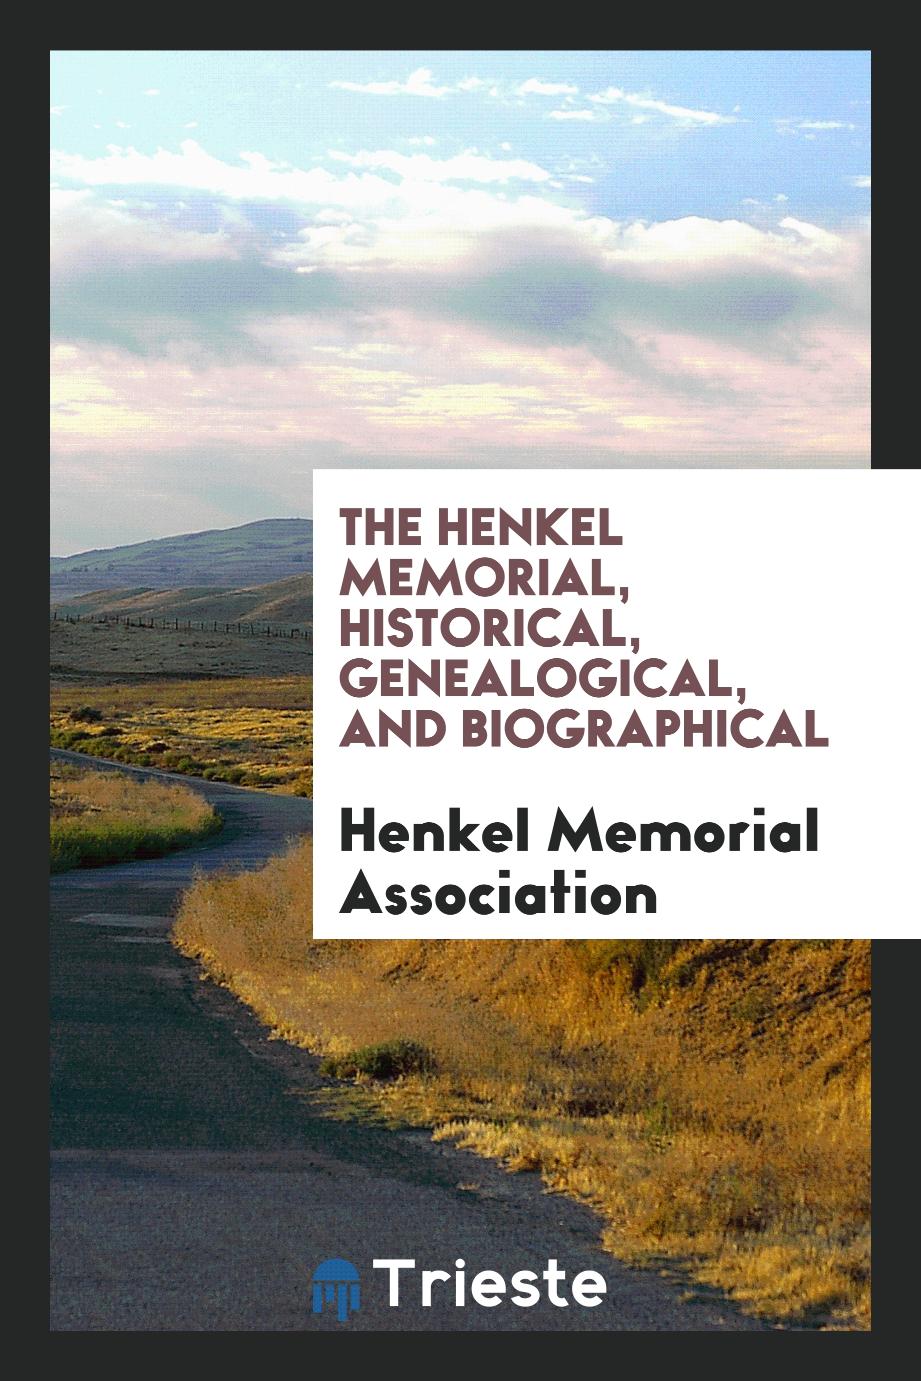 The Henkel Memorial, Historical, Genealogical, and Biographical